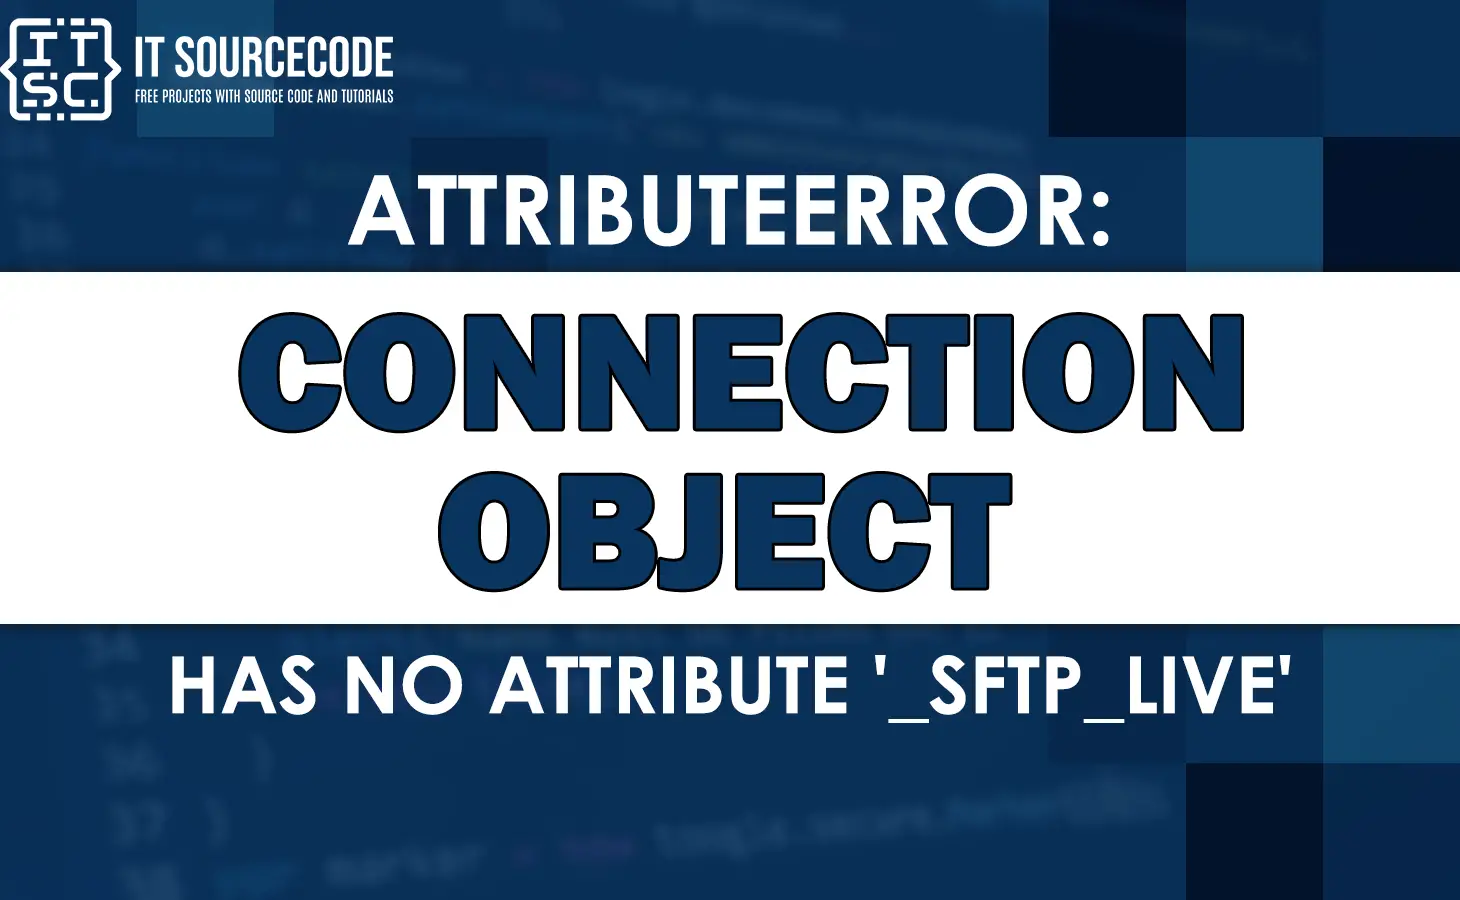 Attributeerror 'connection' object has no attribute 'sftp_live'